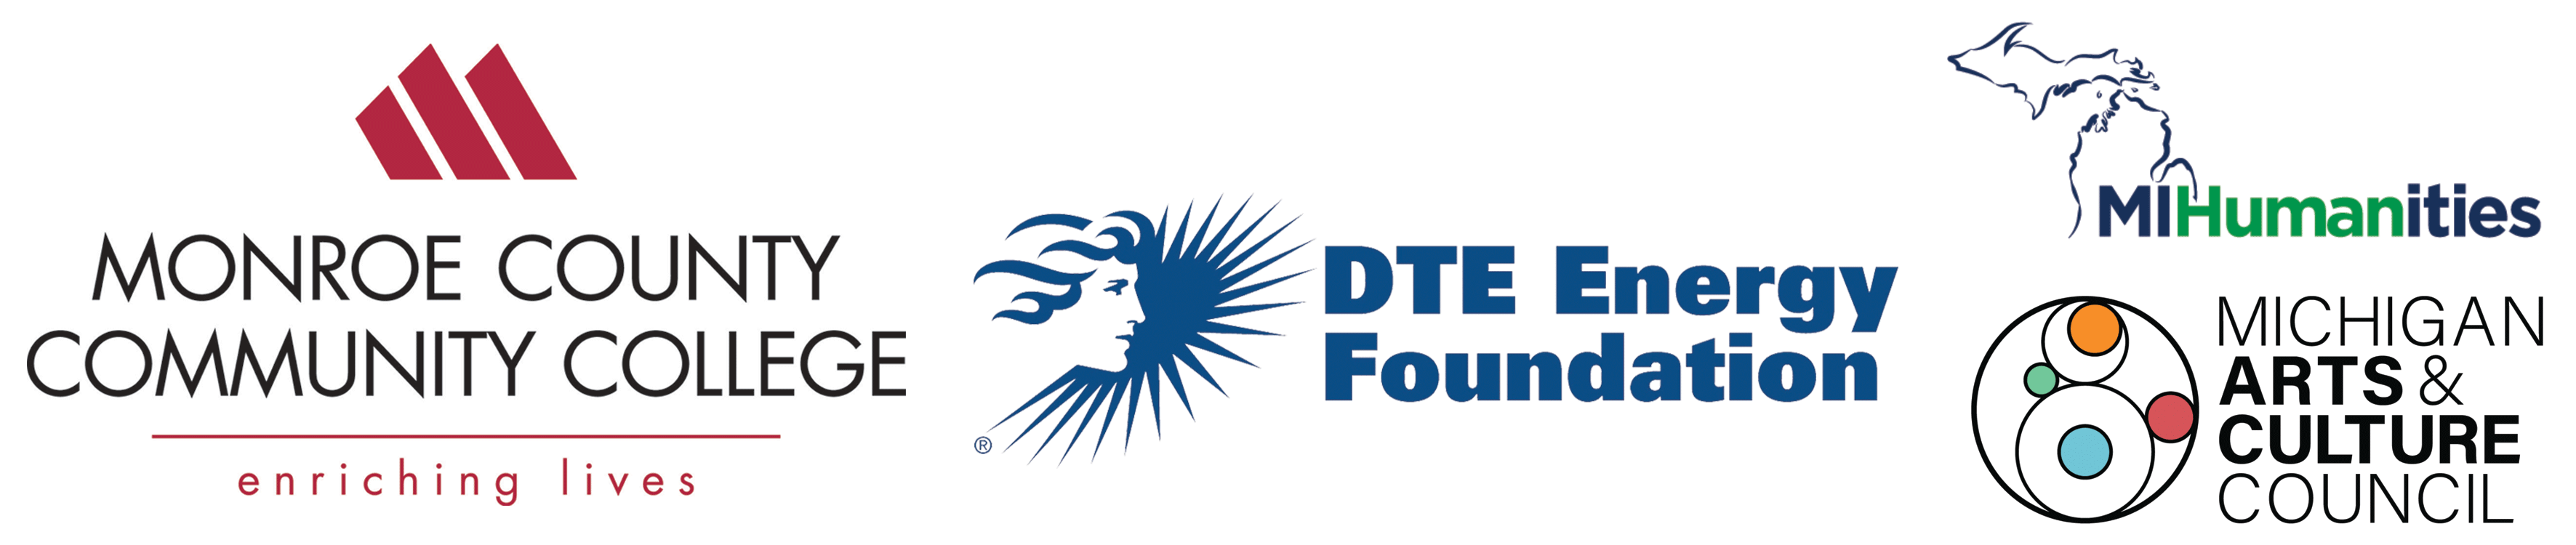 MCCC, DTE, and Michigan Arts and Humanities logos